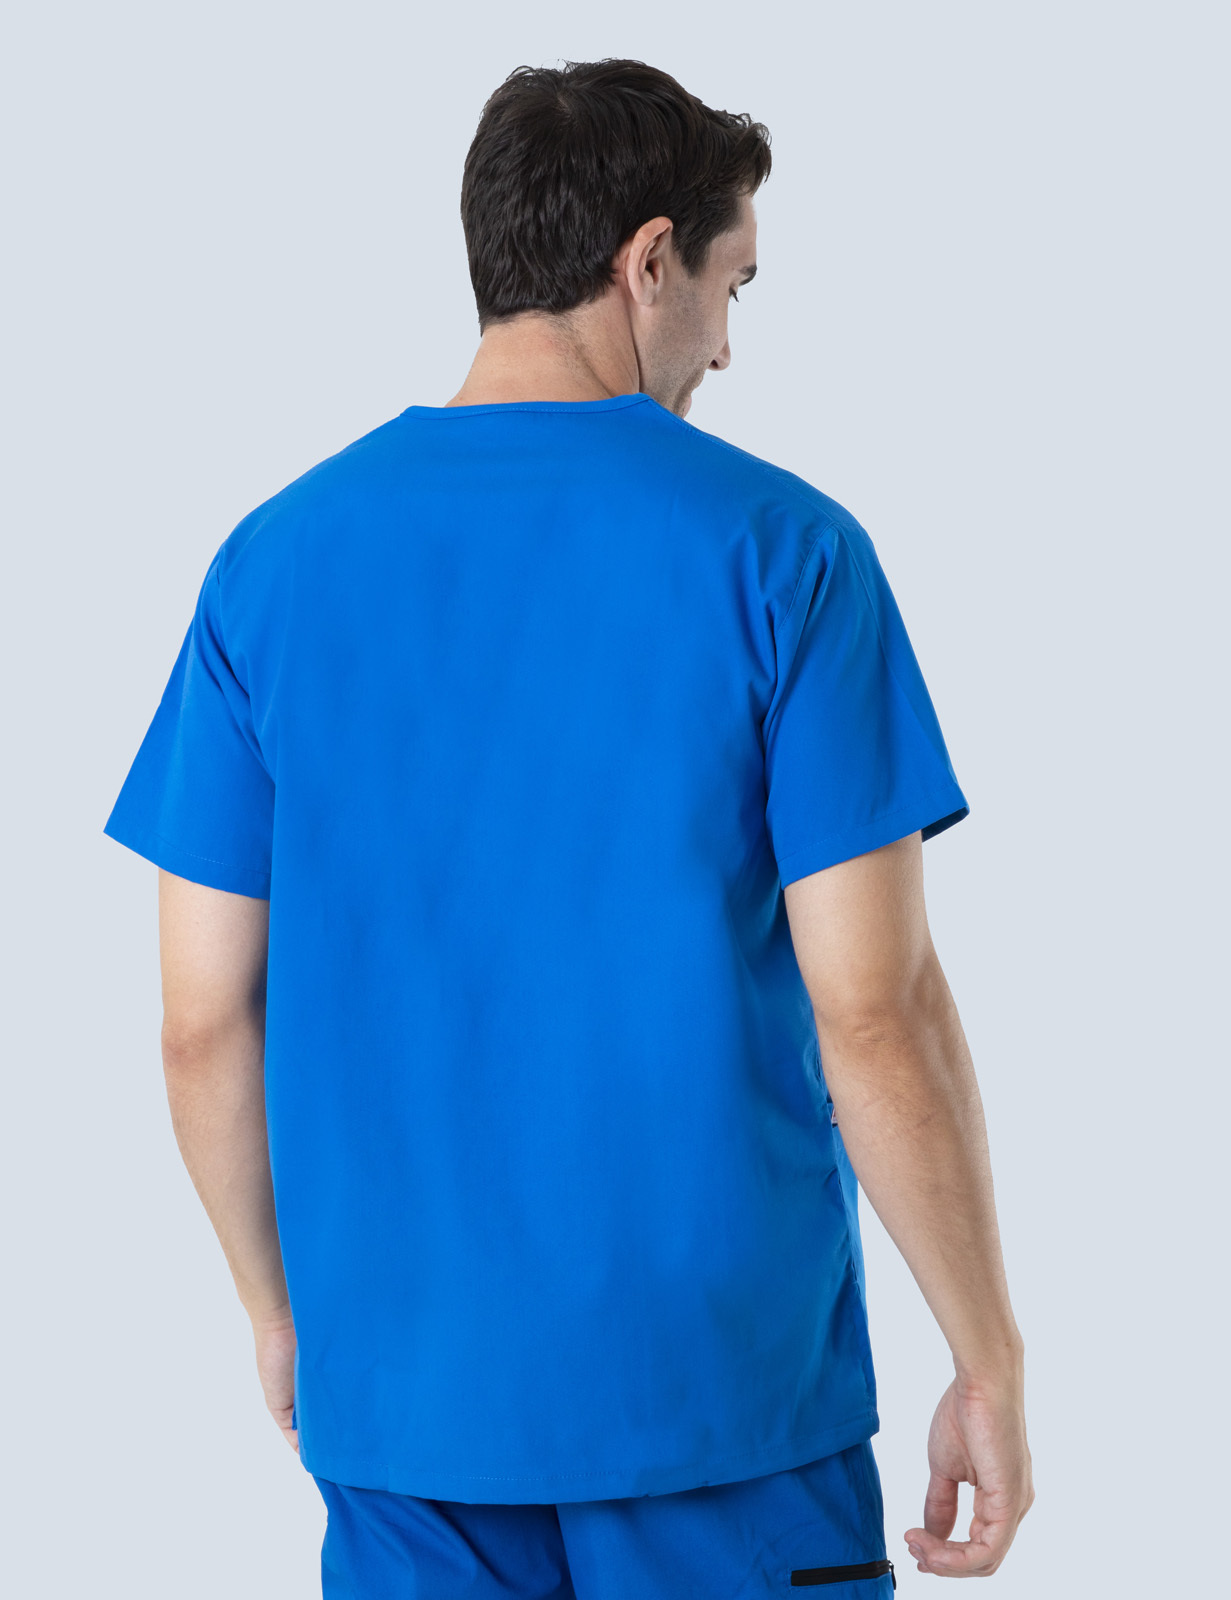 Men's Fit Solid Scrub Top - Royal - 3X Large - 2